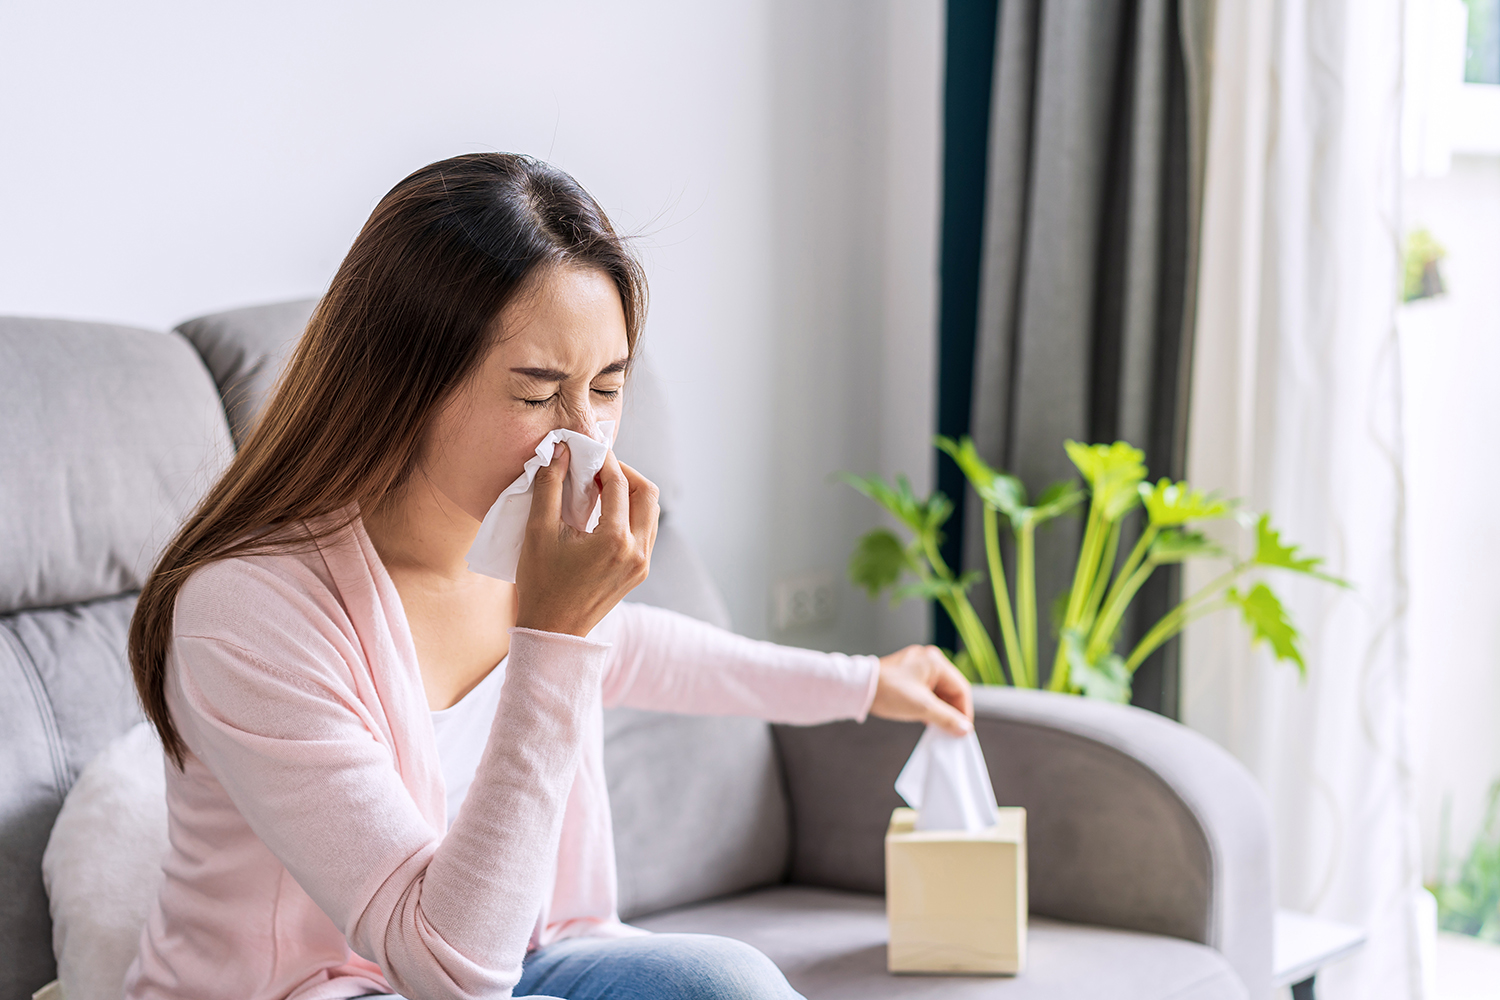 home air quality - spring allergies